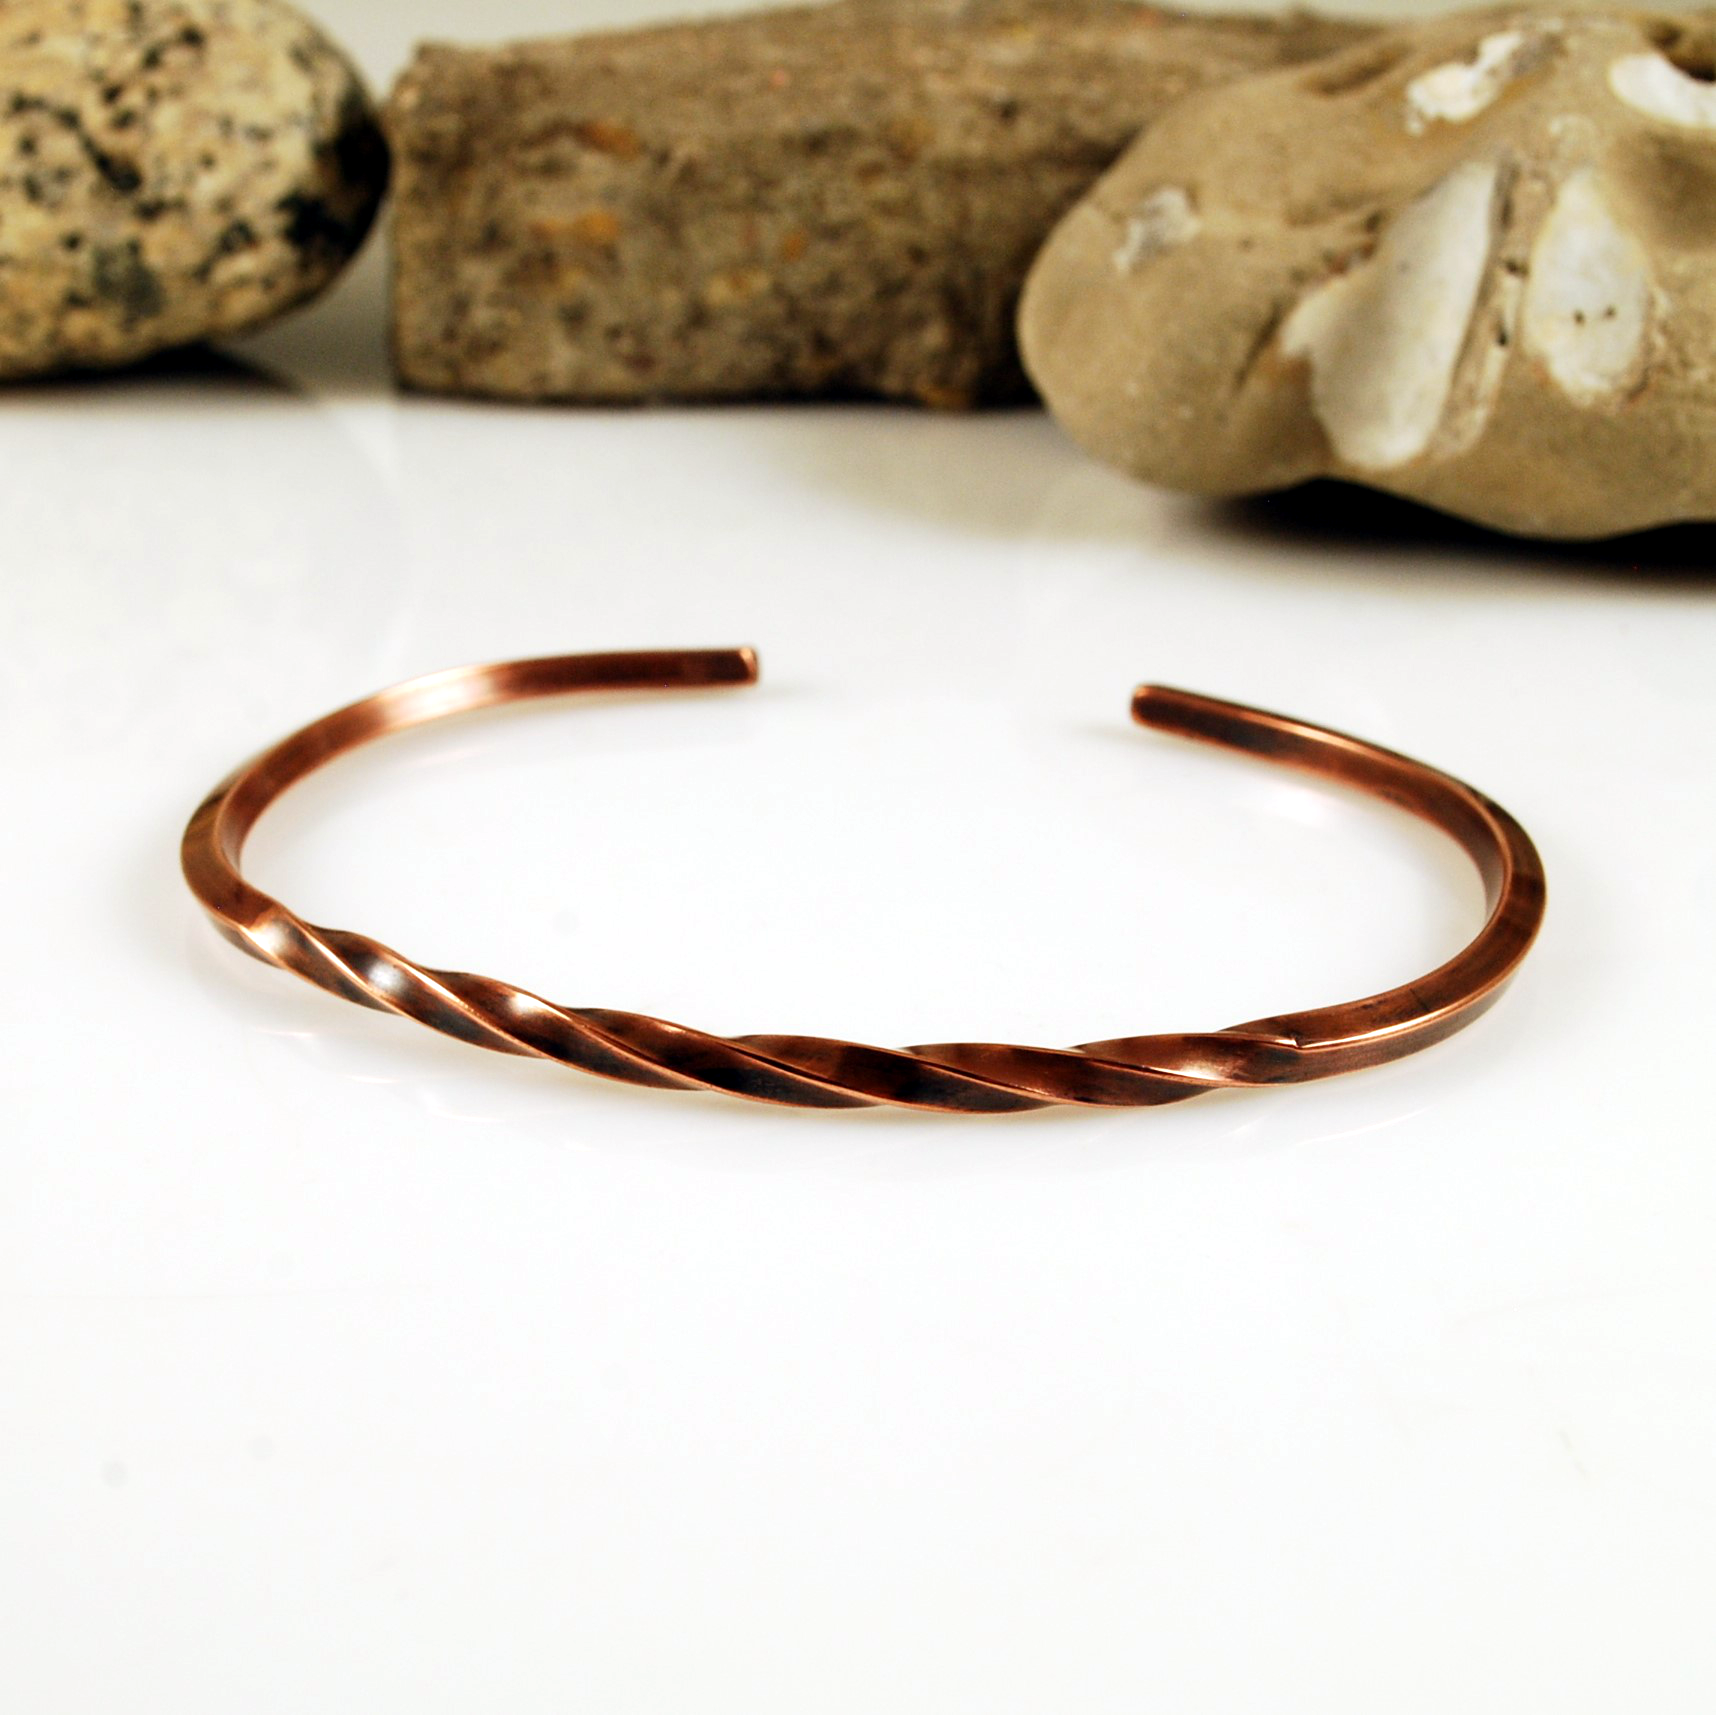 Pure Copper Bangle with 18 Sterling Silver Rivets – The Hammering Man